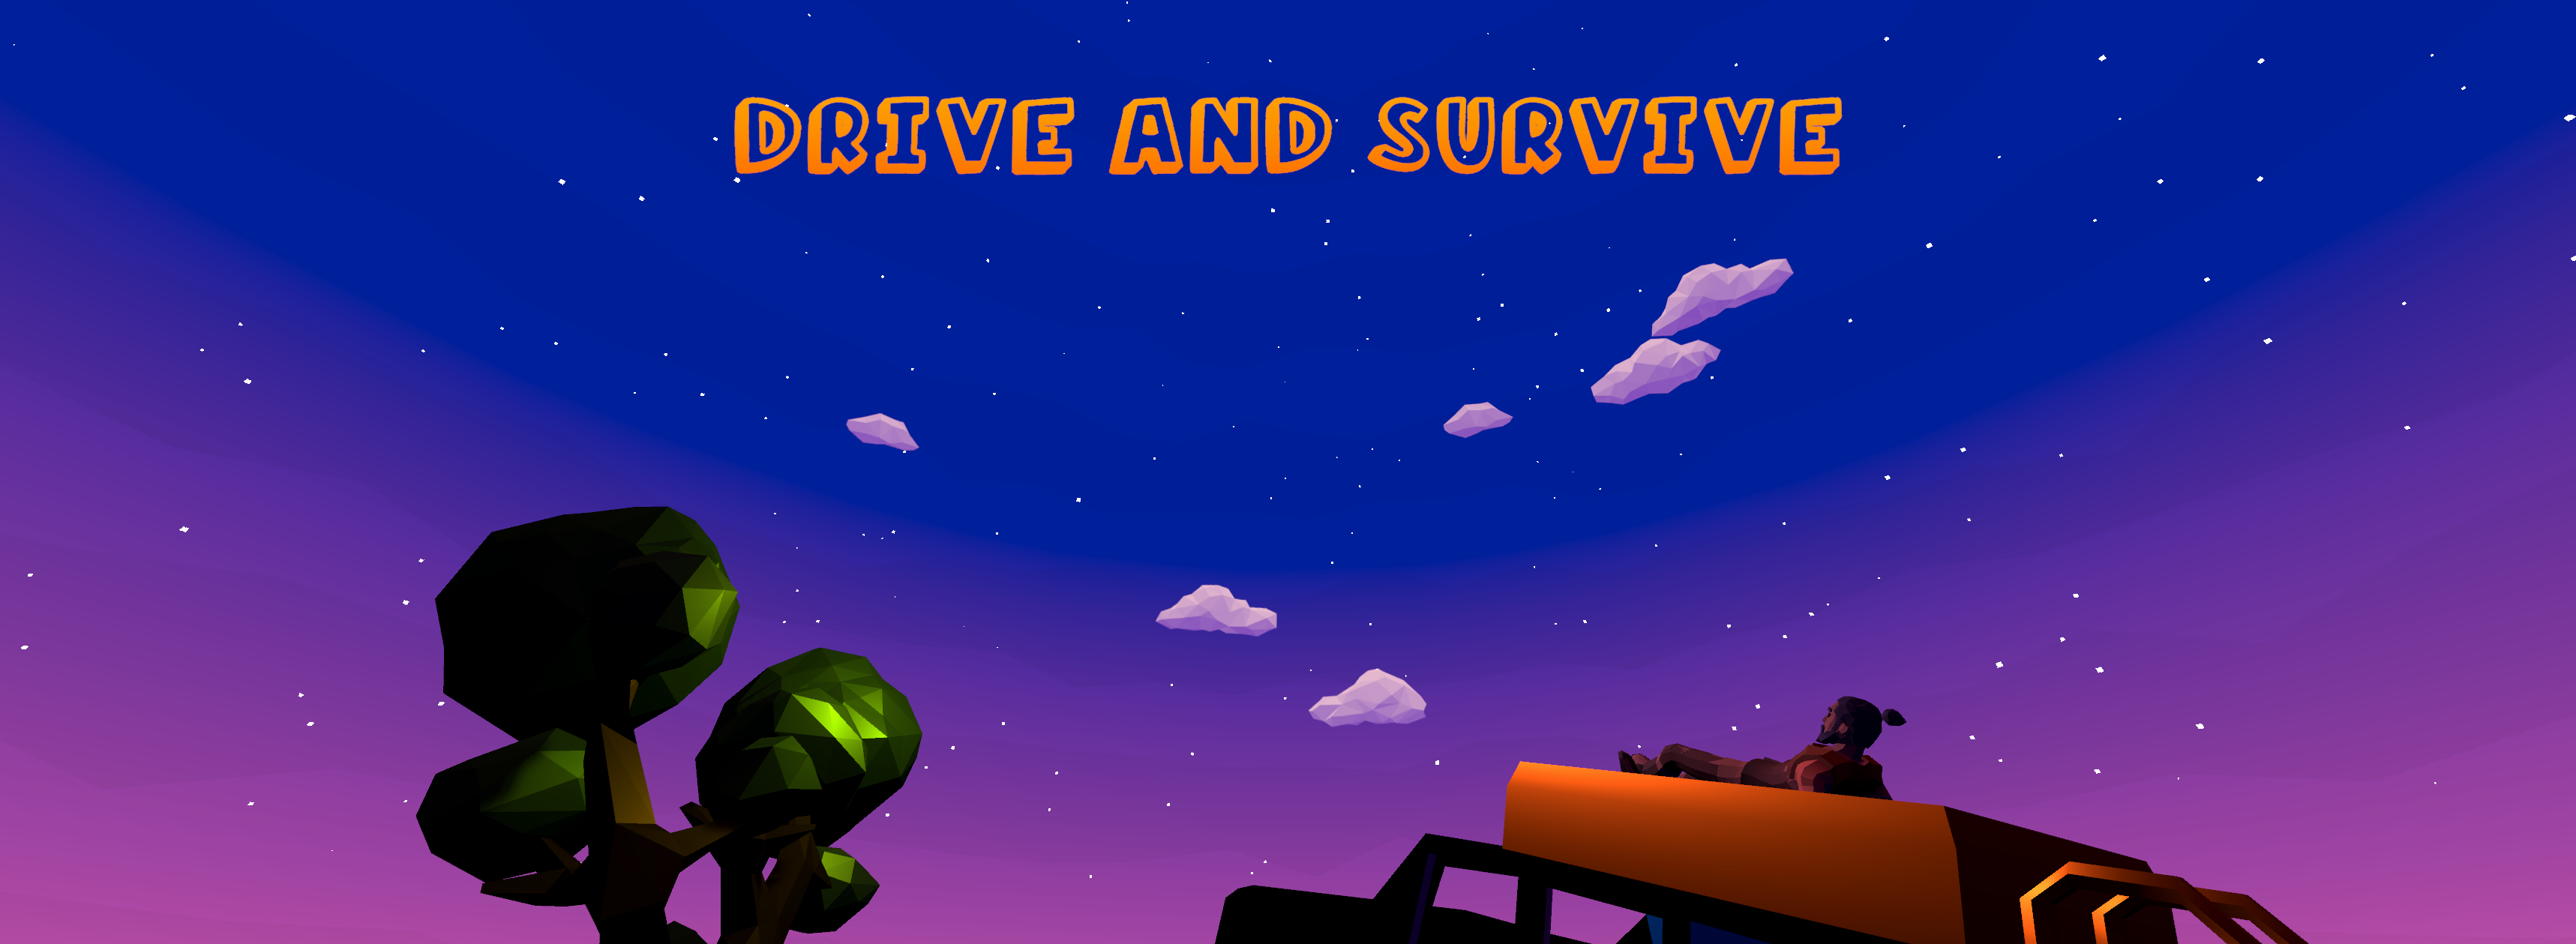 Drive and Survive